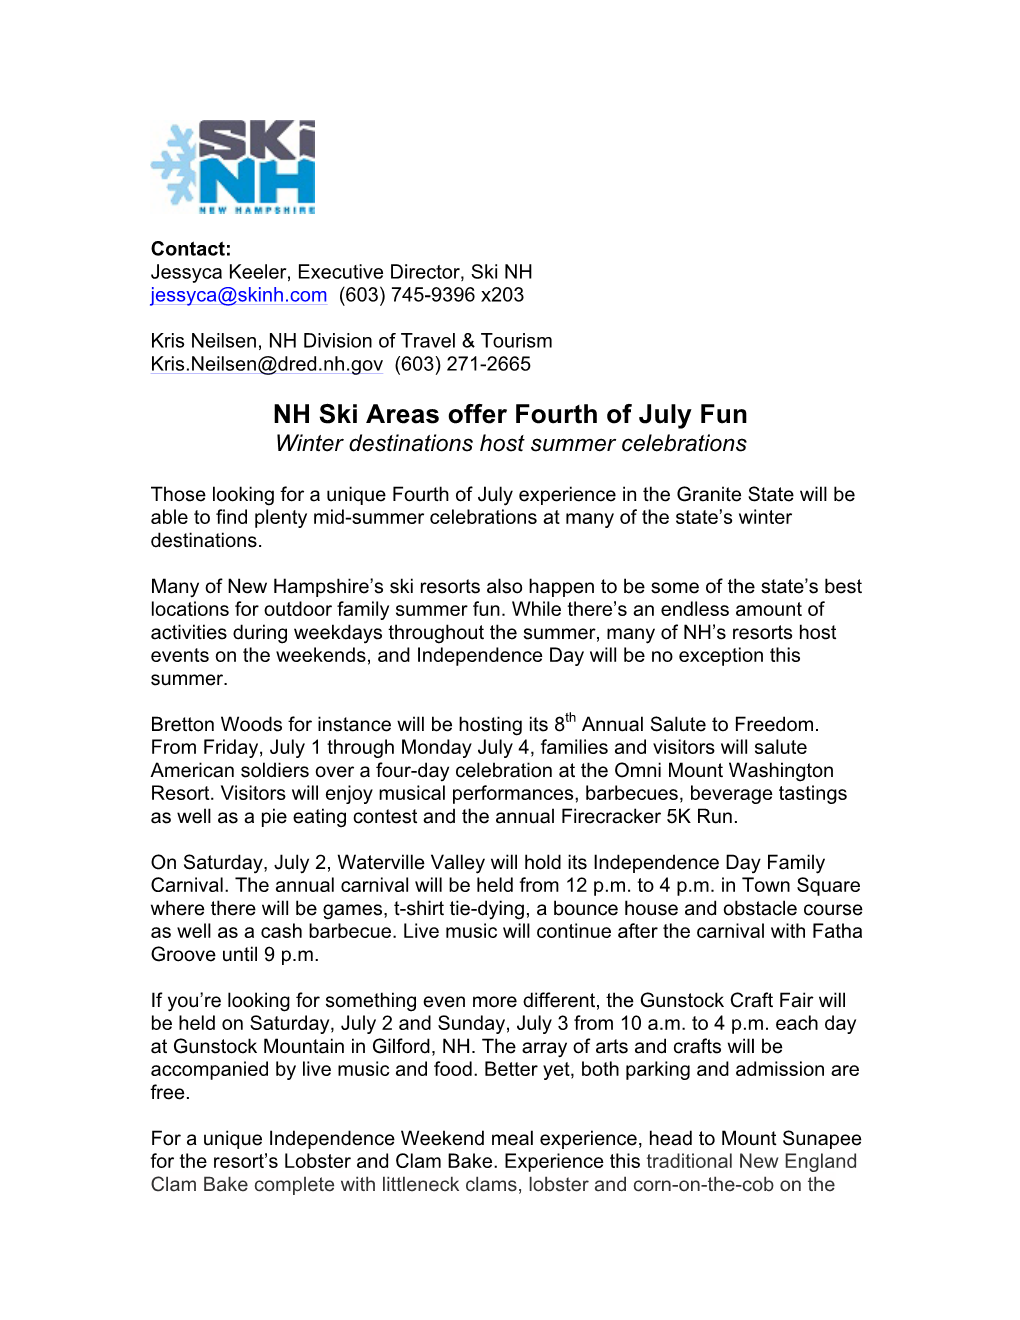 NH Ski Areas Offer Fourth of July Fun Winter Destinations Host Summer Celebrations